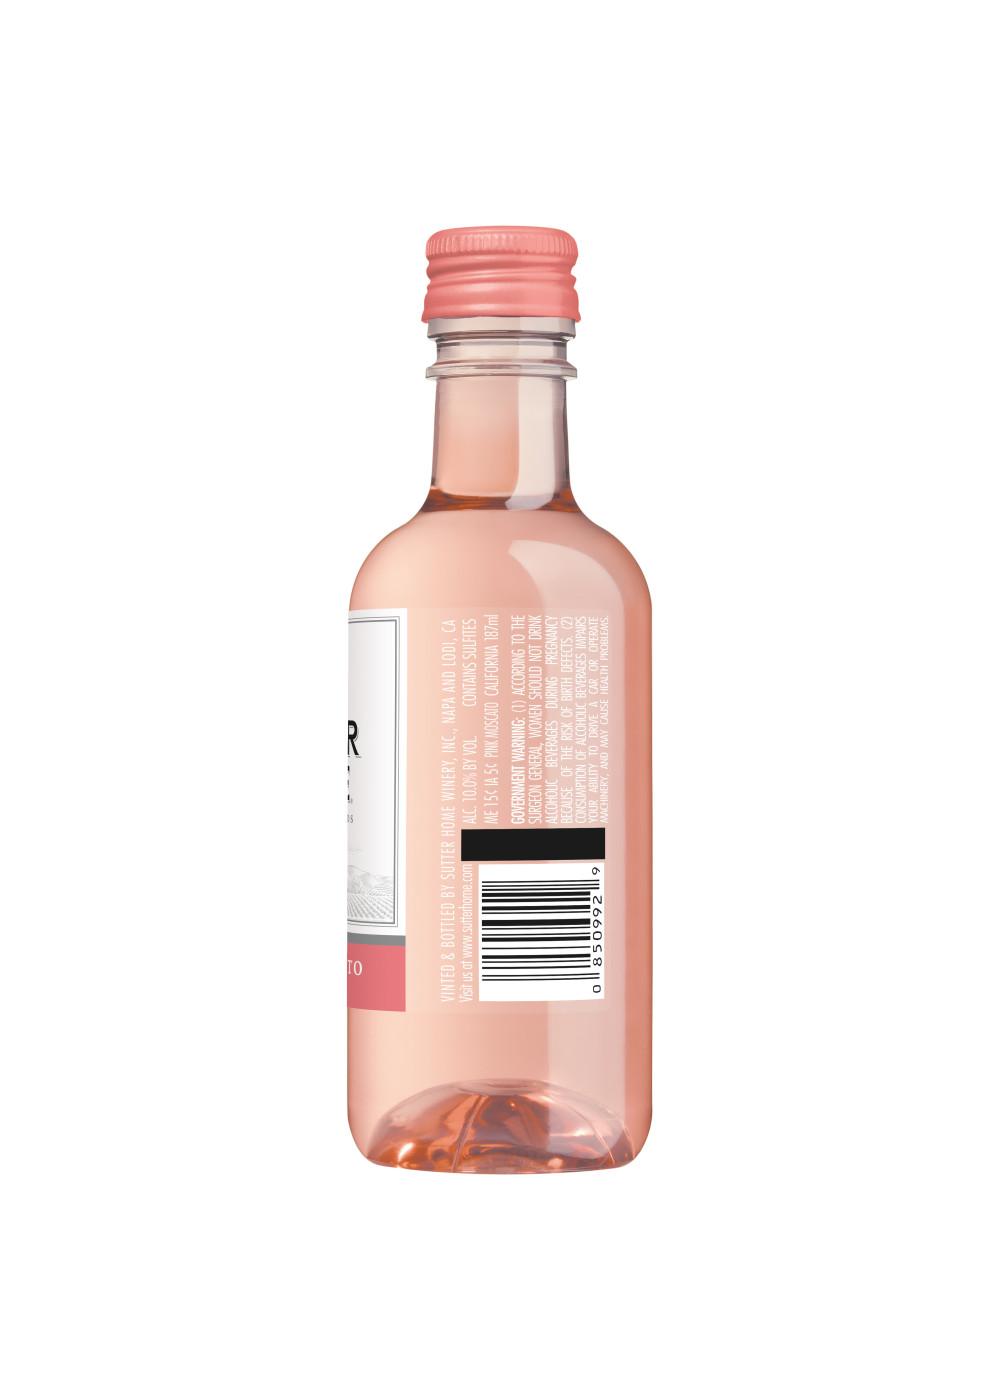 Sutter Home Family Vineyards Pink Moscato 187 mL Bottles; image 2 of 7